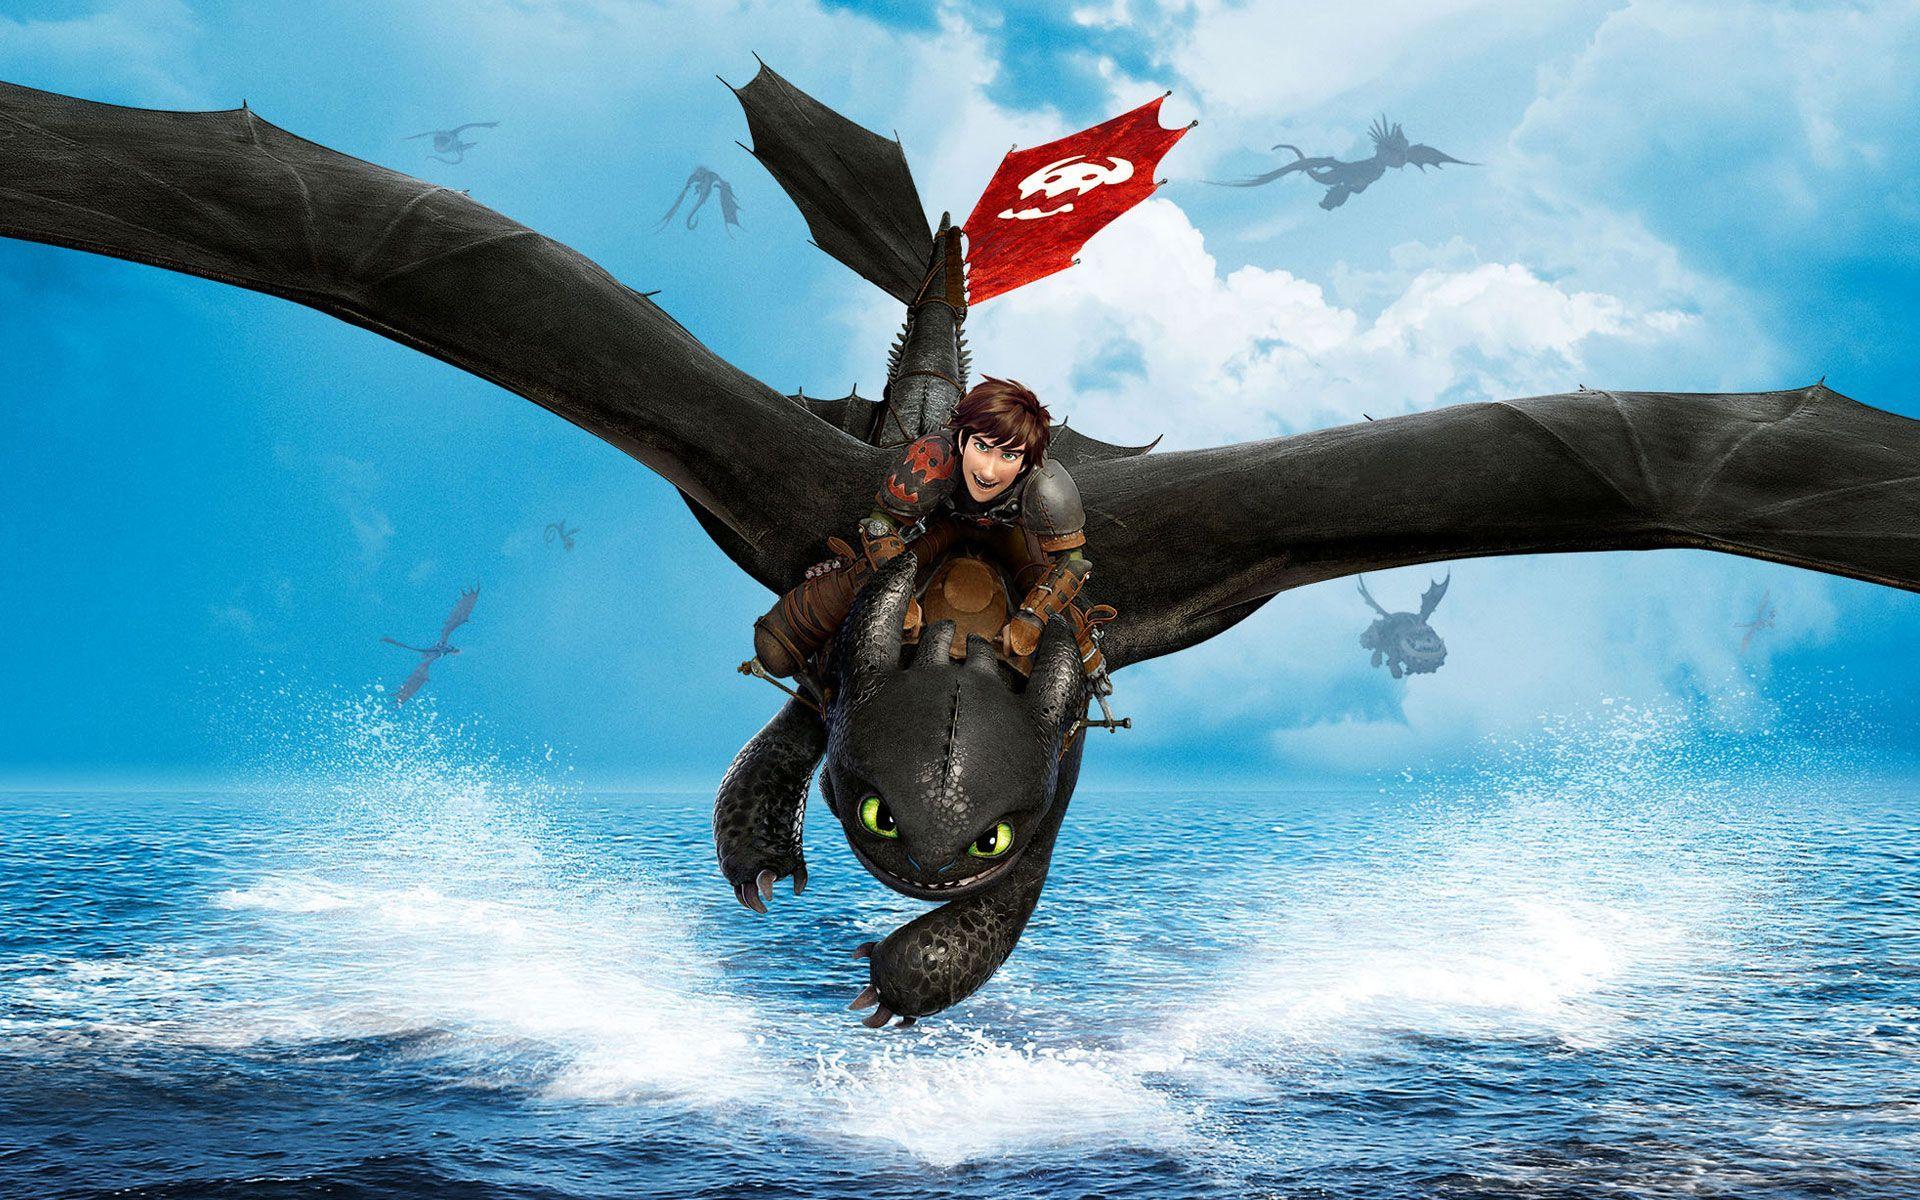 How to train your dragon wallpaper with Hiccup and. Wallpaper 4k